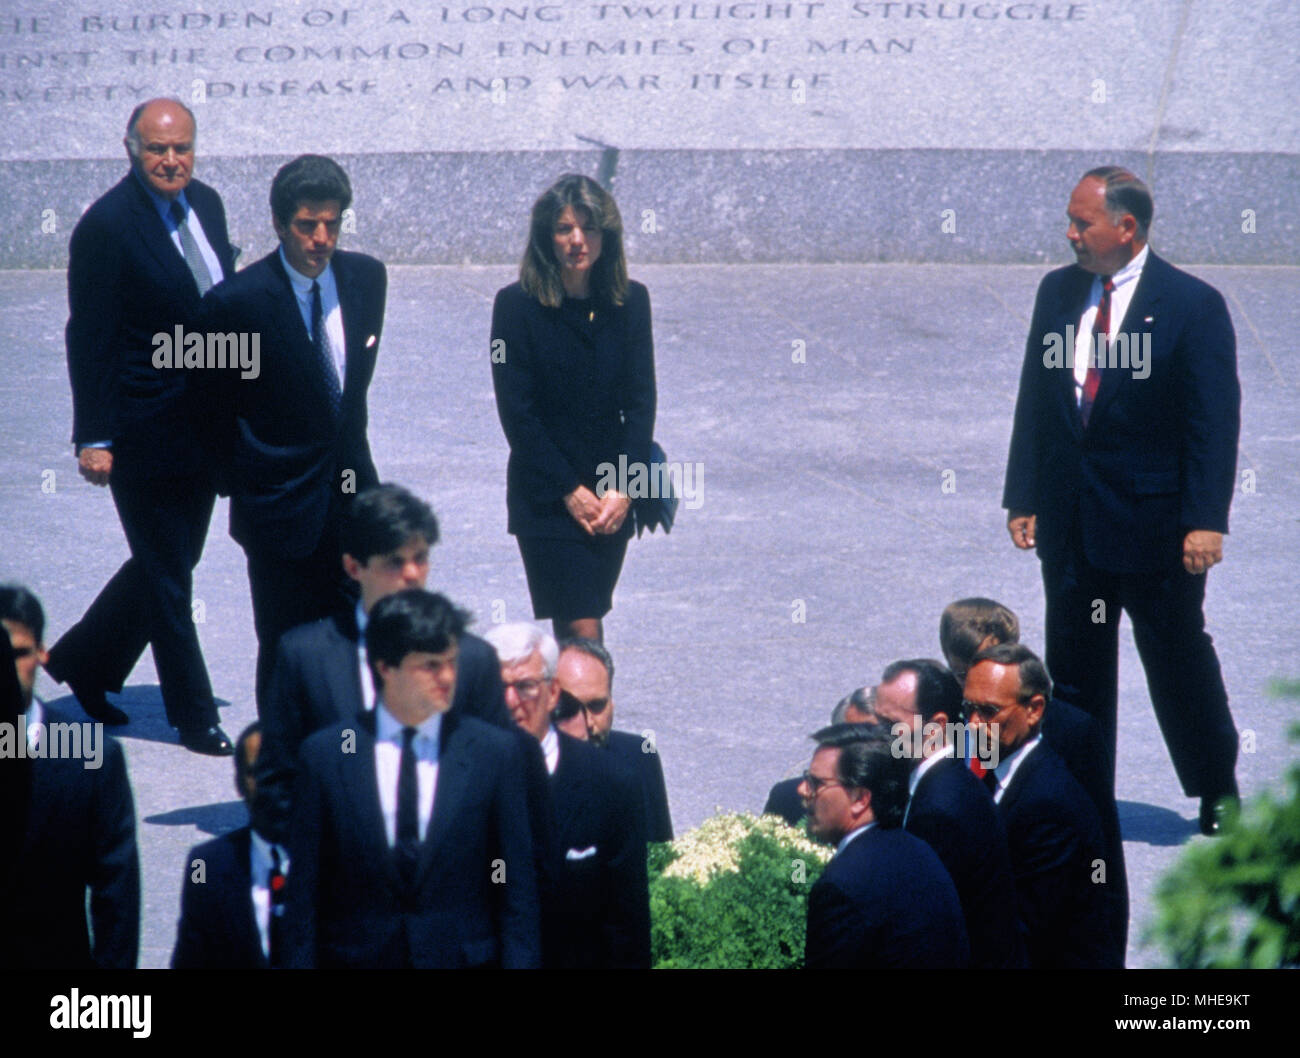 Arlington Virginia, USA, May 23, 1994 John F. Kennedy Jr. his sister Caroline Kennedy Schlossberg, President William Clinton and First Lady Hillary Clinton, Senator Robert Kennedy, along with the rest of the Kennedy family attend the burial of Jacqueline Kennedy Onassis. 'Jackie' was laid to rest next to the eternal flame she lighted three decades ago at the grave of her assassinated husband, the 35th President of the United States, John F. Kennedy. Credit:Mark Reinstein /MediaPunch Stock Photo